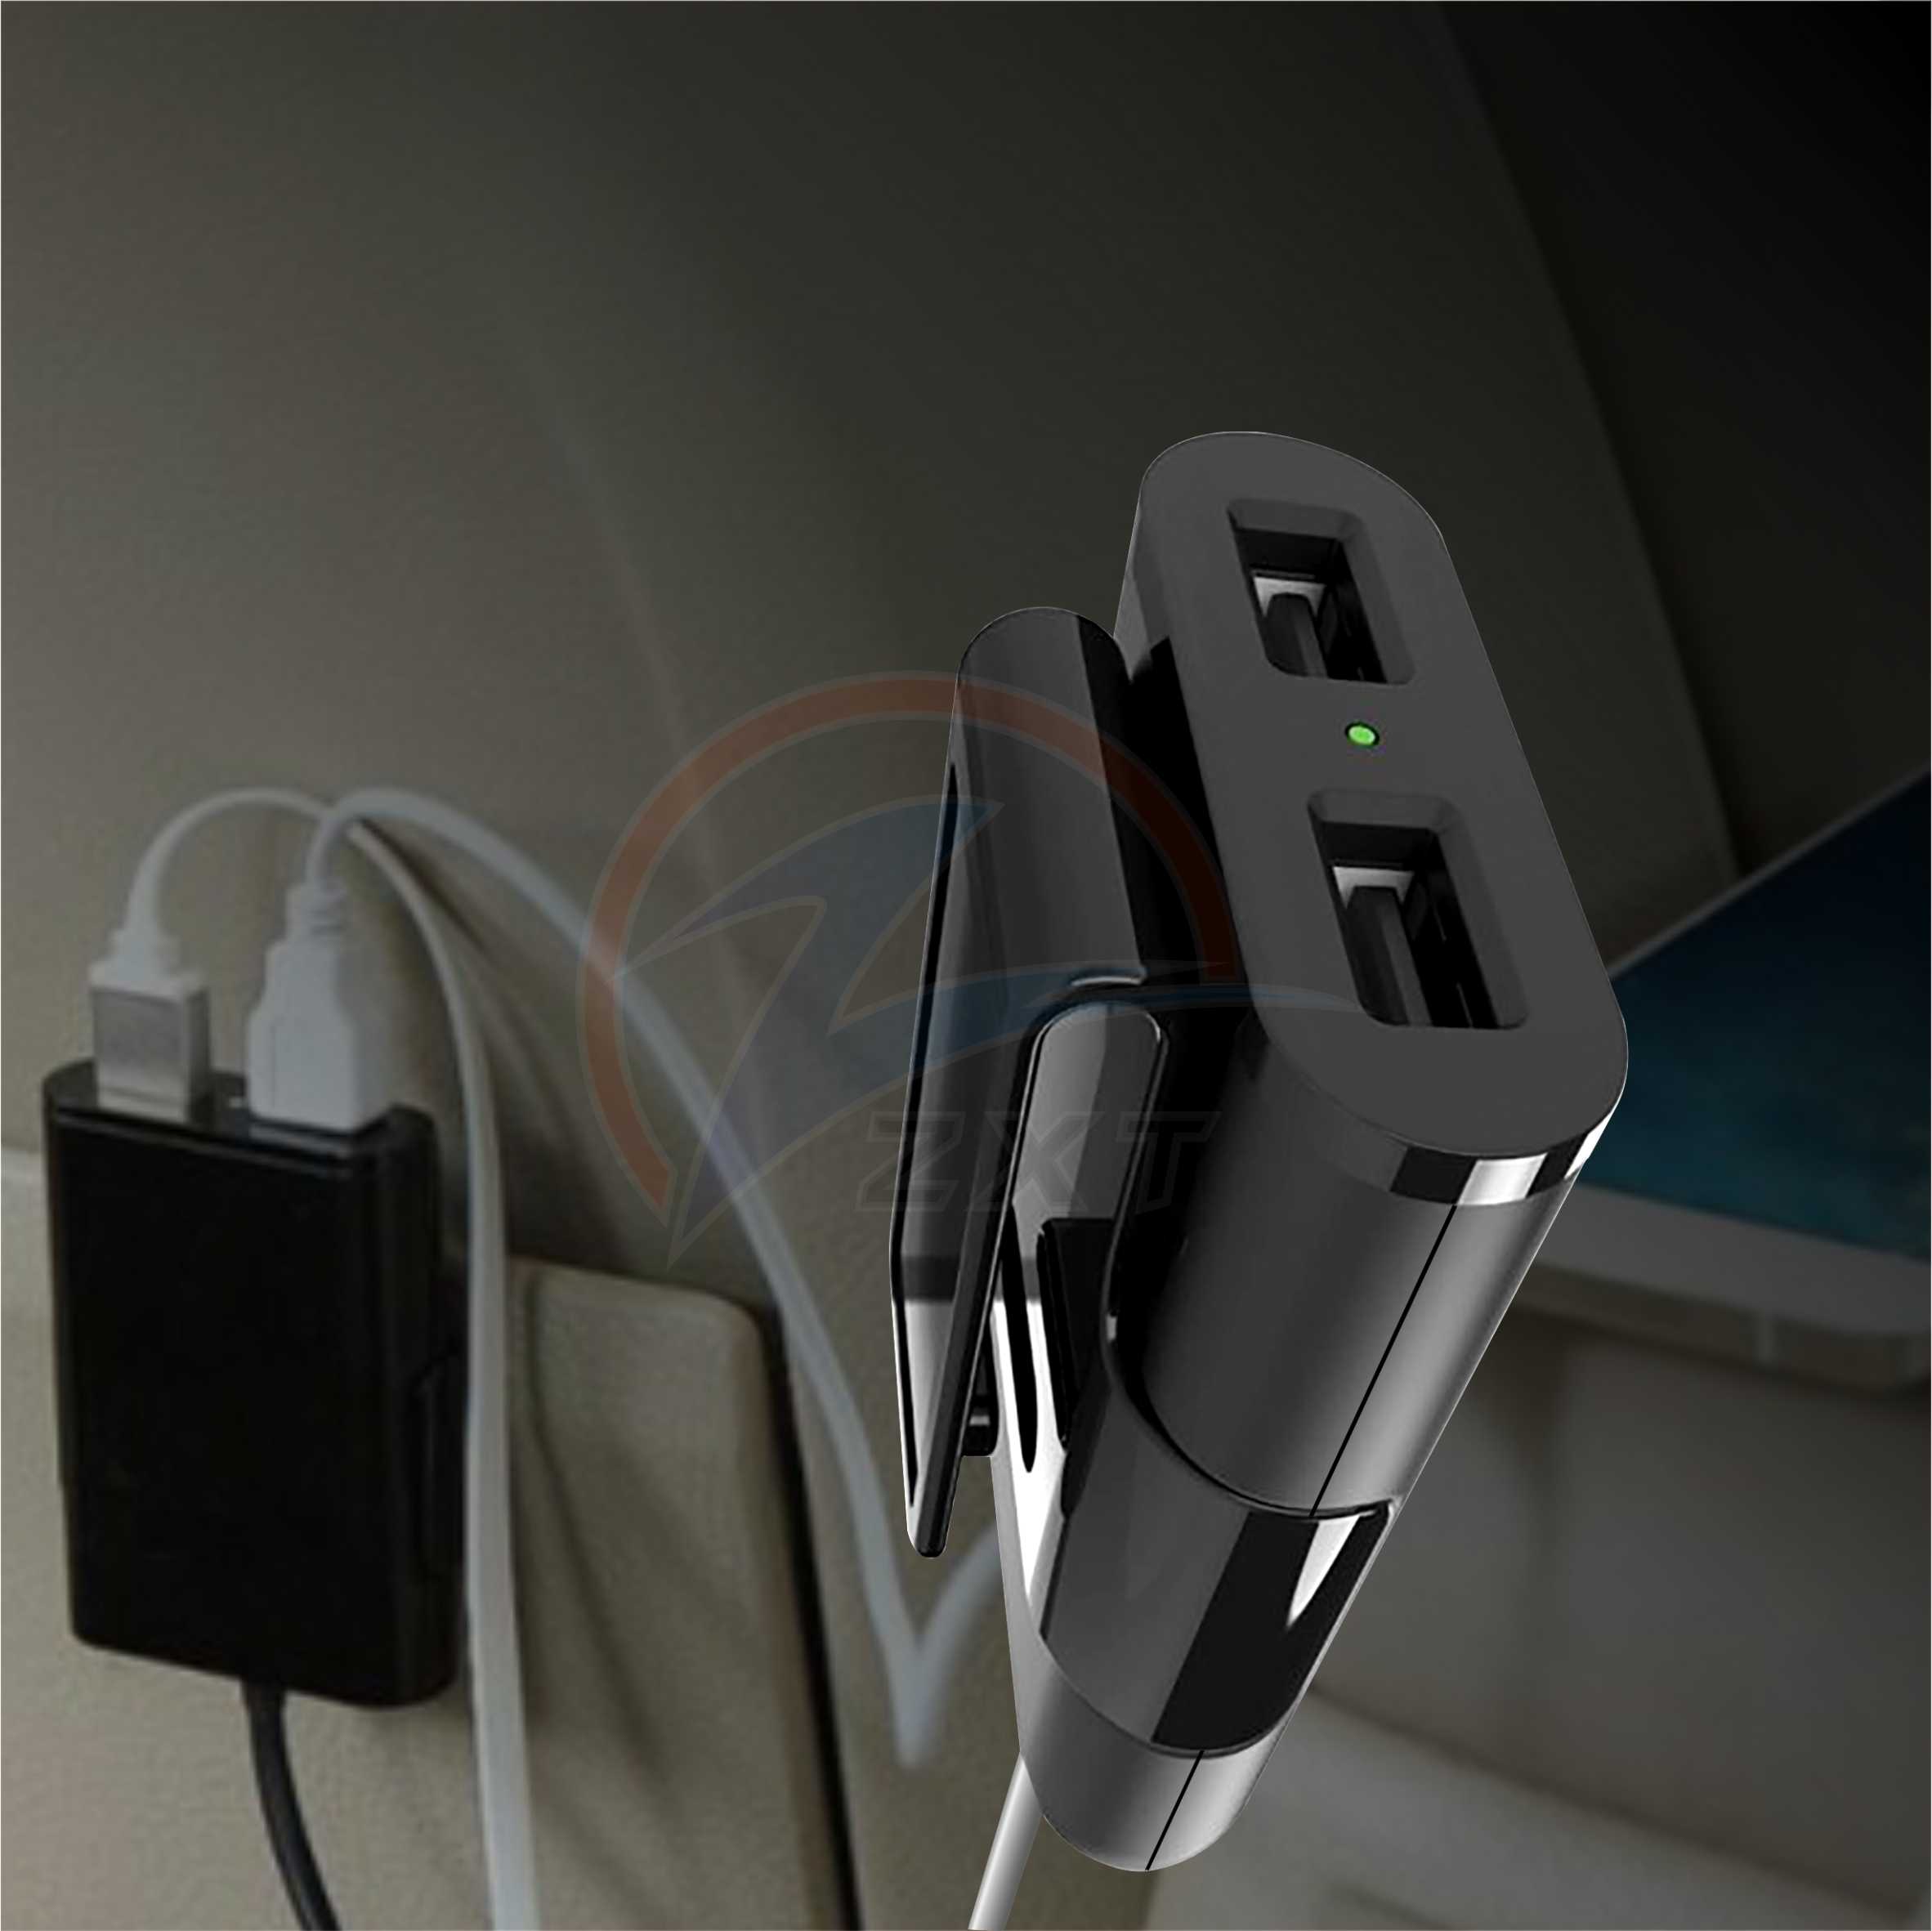 4 in 1 Passenger Car Charger